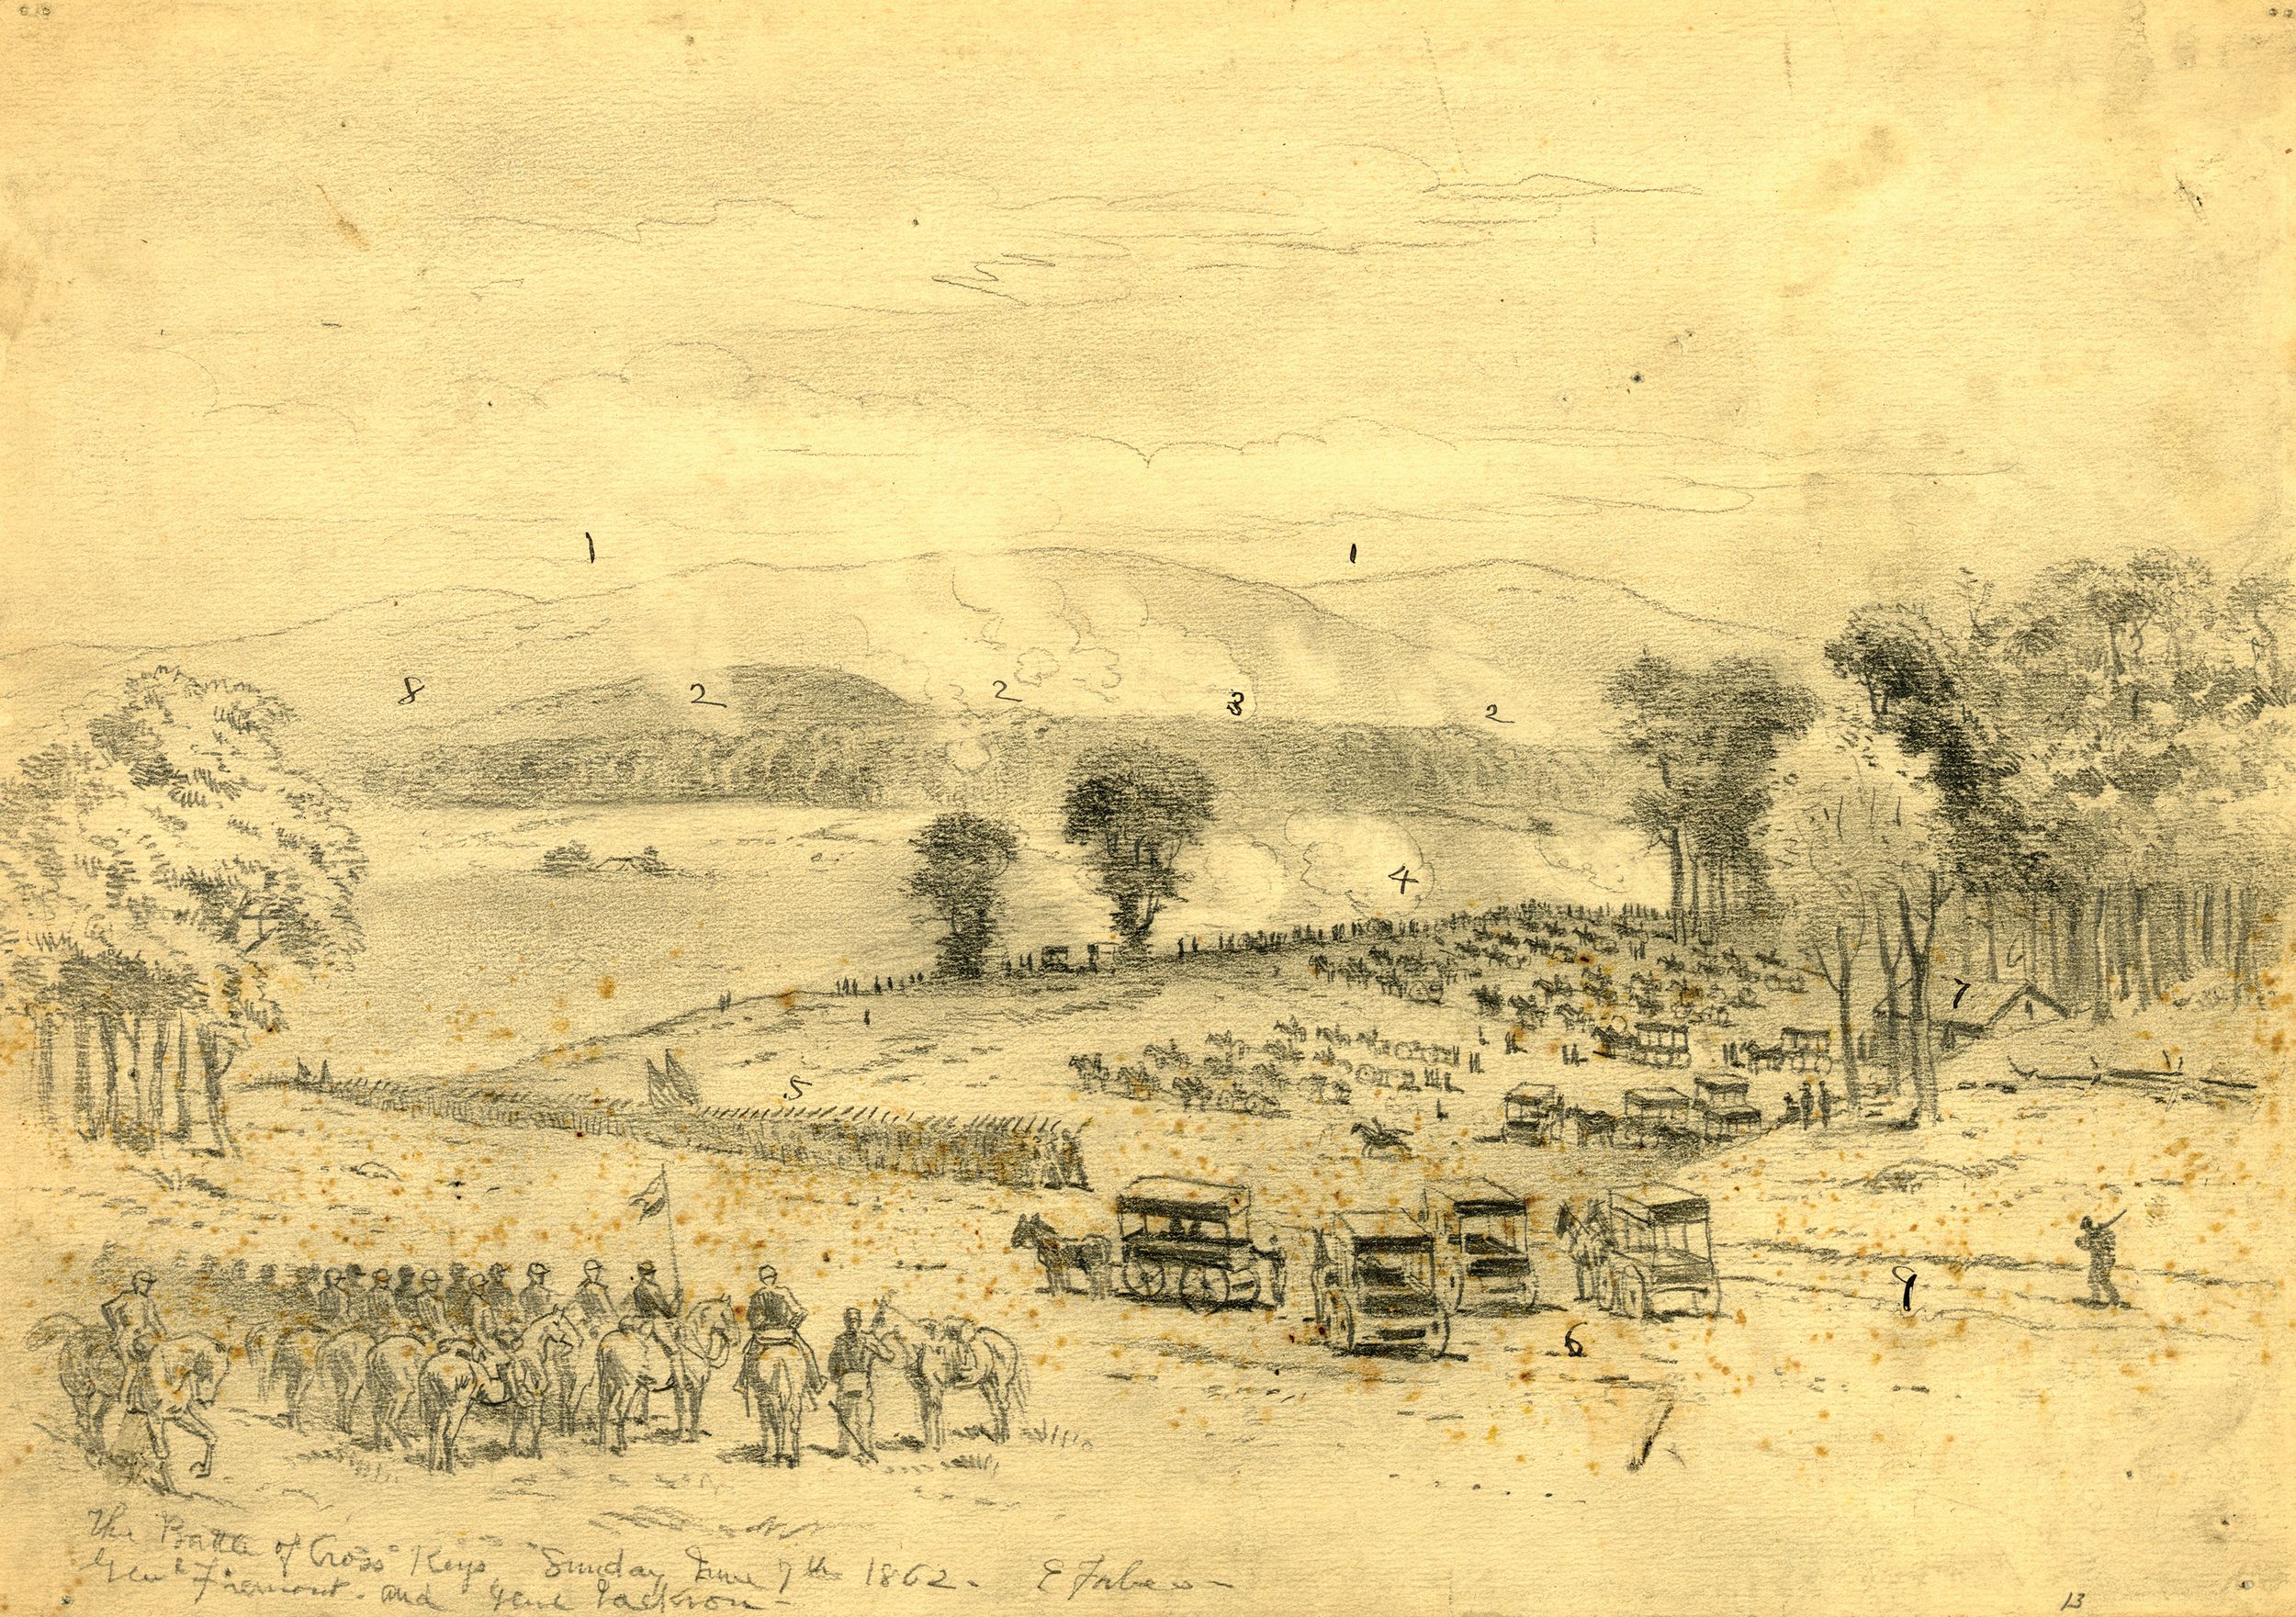 The Battle of Cross Keys, a strategic Confederate victory for General “Stonewall” Jackson took place the day before the Battle of Port Republic. The scene was captured in a pencil drawing by American landscape painter Edwin Forbes.